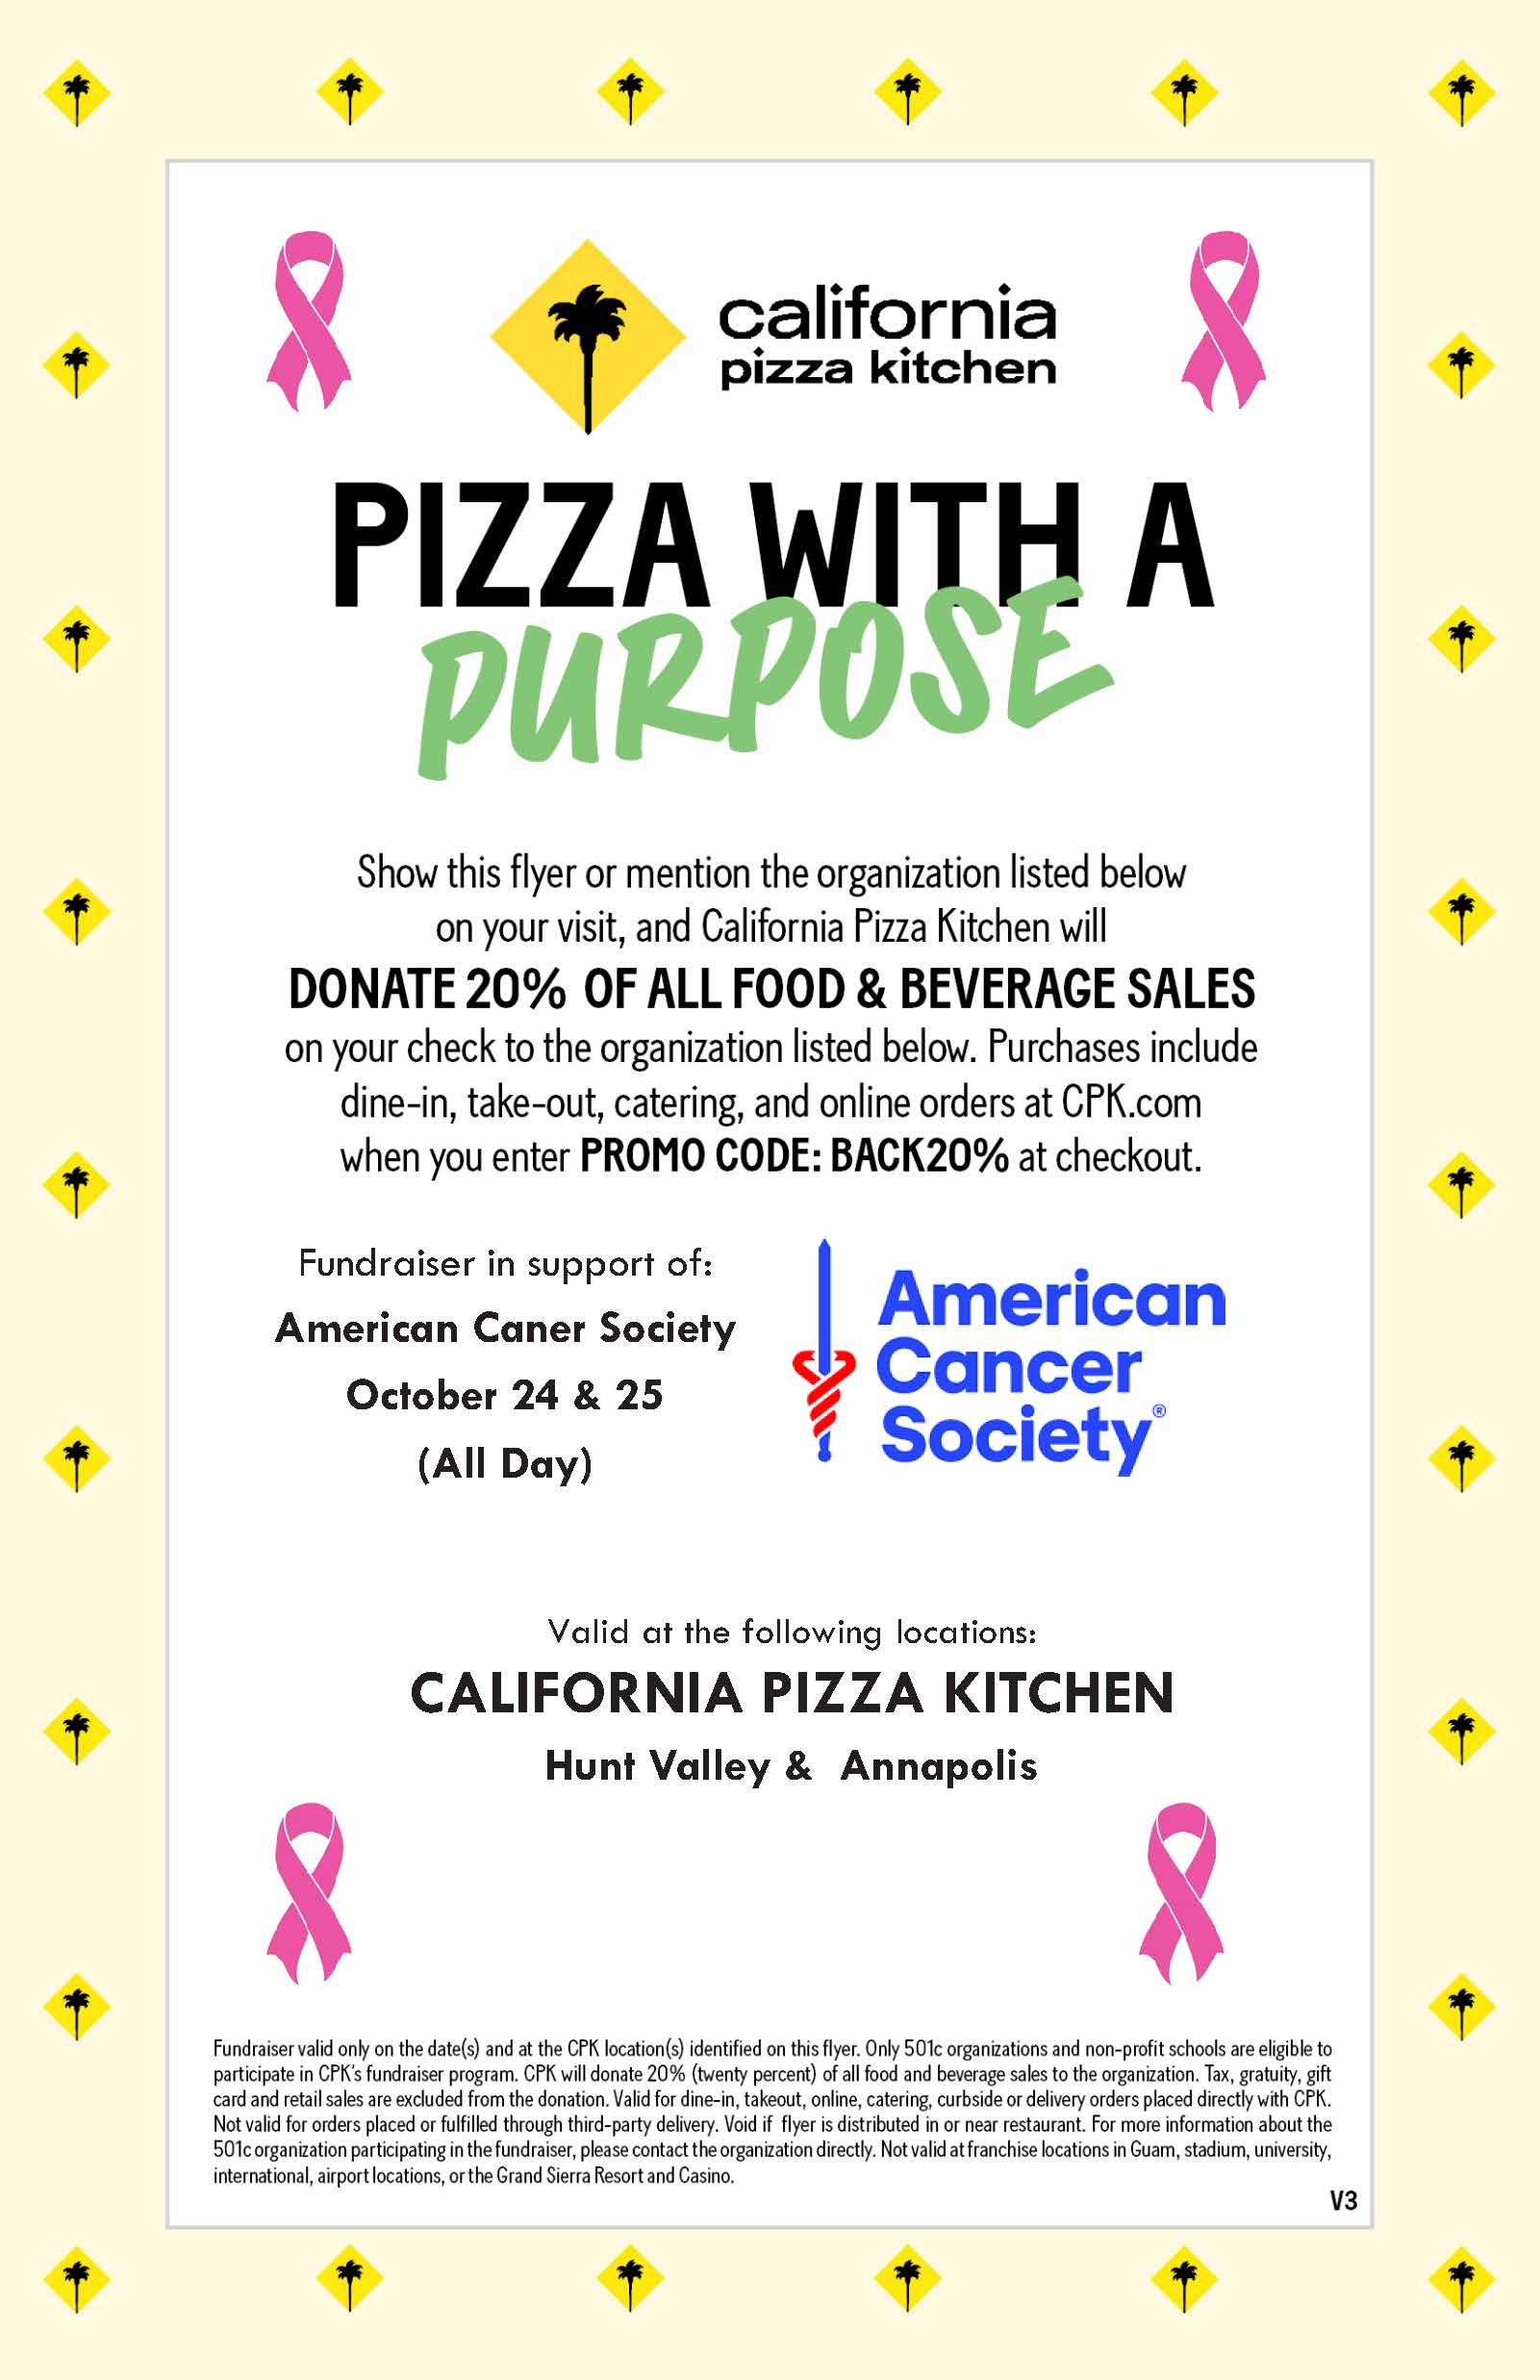 Fundraiser For American Cancer Society